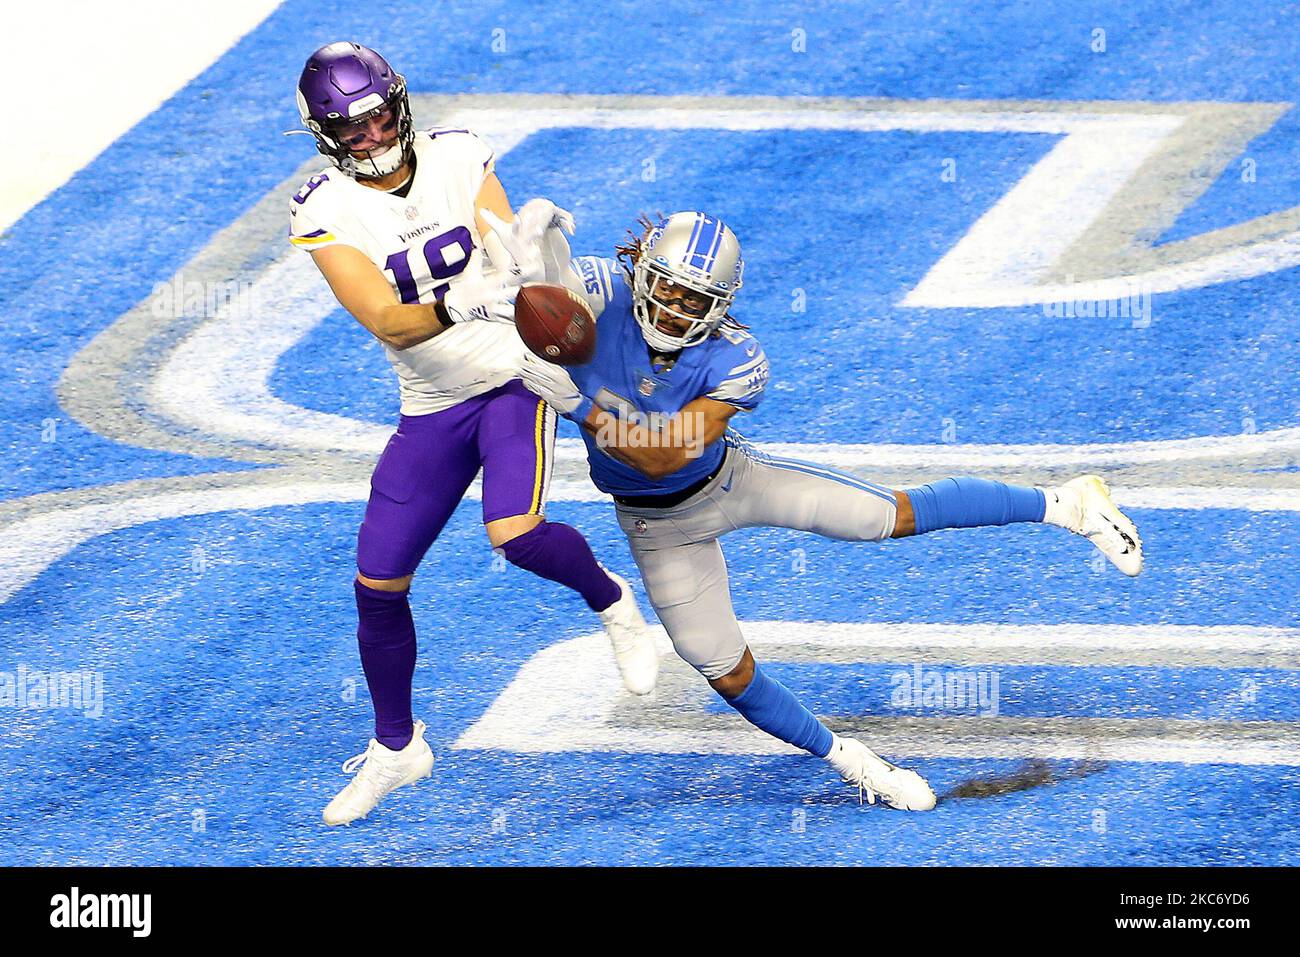 Detroit Lions cornerback Darryl Roberts (29) blocks a pass to Minnesota Vikings wide receiver Adam Thielen (19) in the endzone during the first half of an NFL football game between the Detroit Lions and the Minnesota Vikings in Detroit, Michigan USA, on Sunday, January 3, 2021. (Photo by Amy Lemus/NurPhoto) Stock Photo